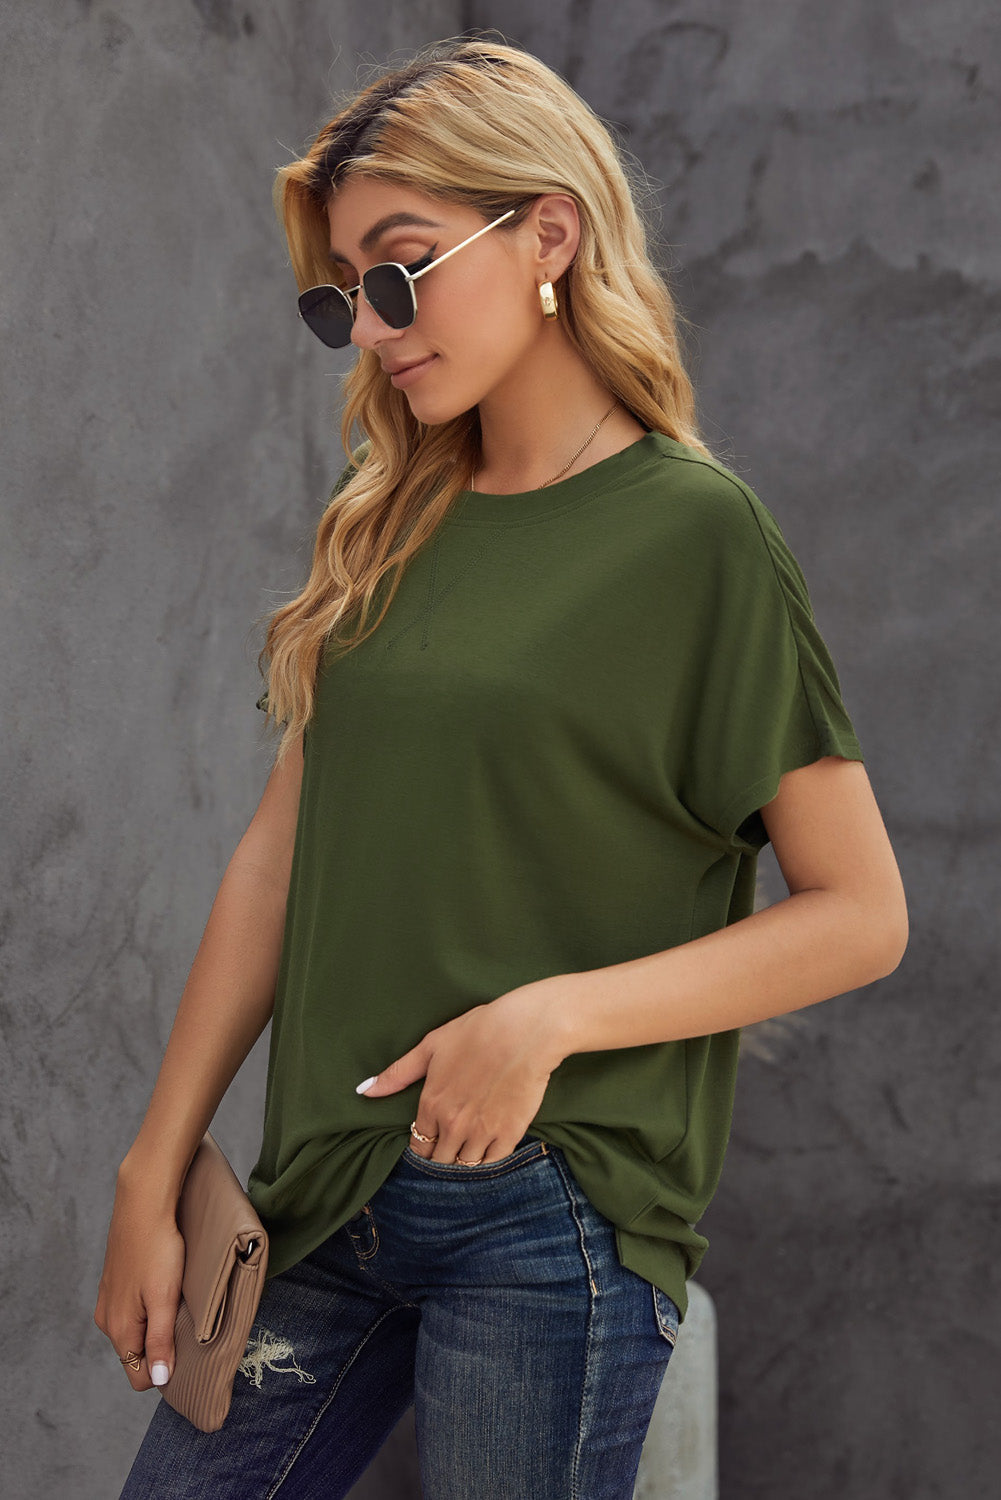 Round Neck Short Sleeve Solid Color Tee Print on any thing USA/STOD clothes